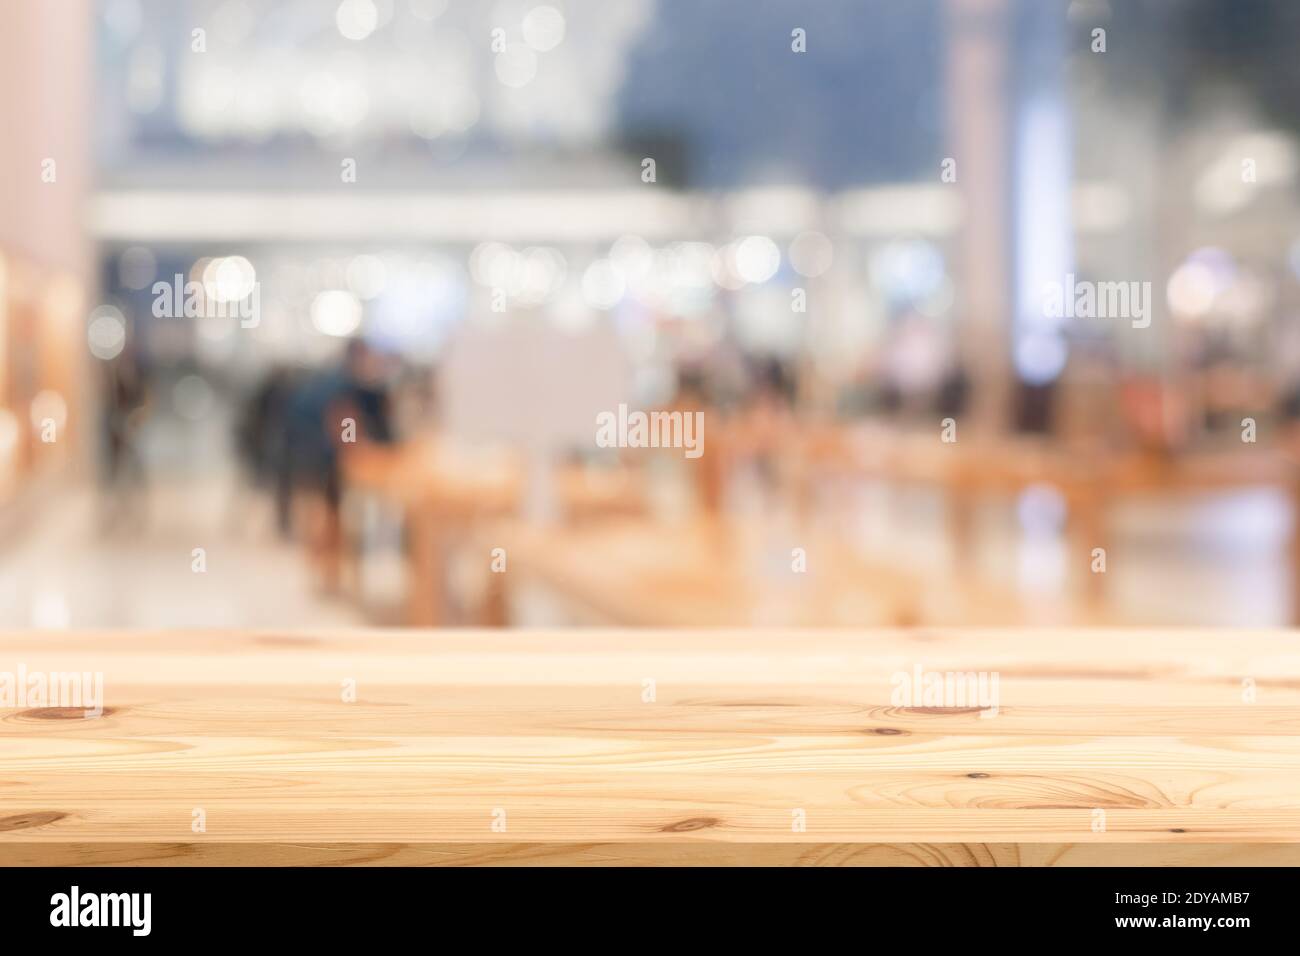 Blur business store shop with wooden table foreground blank for products advertising montage background. Stock Photo